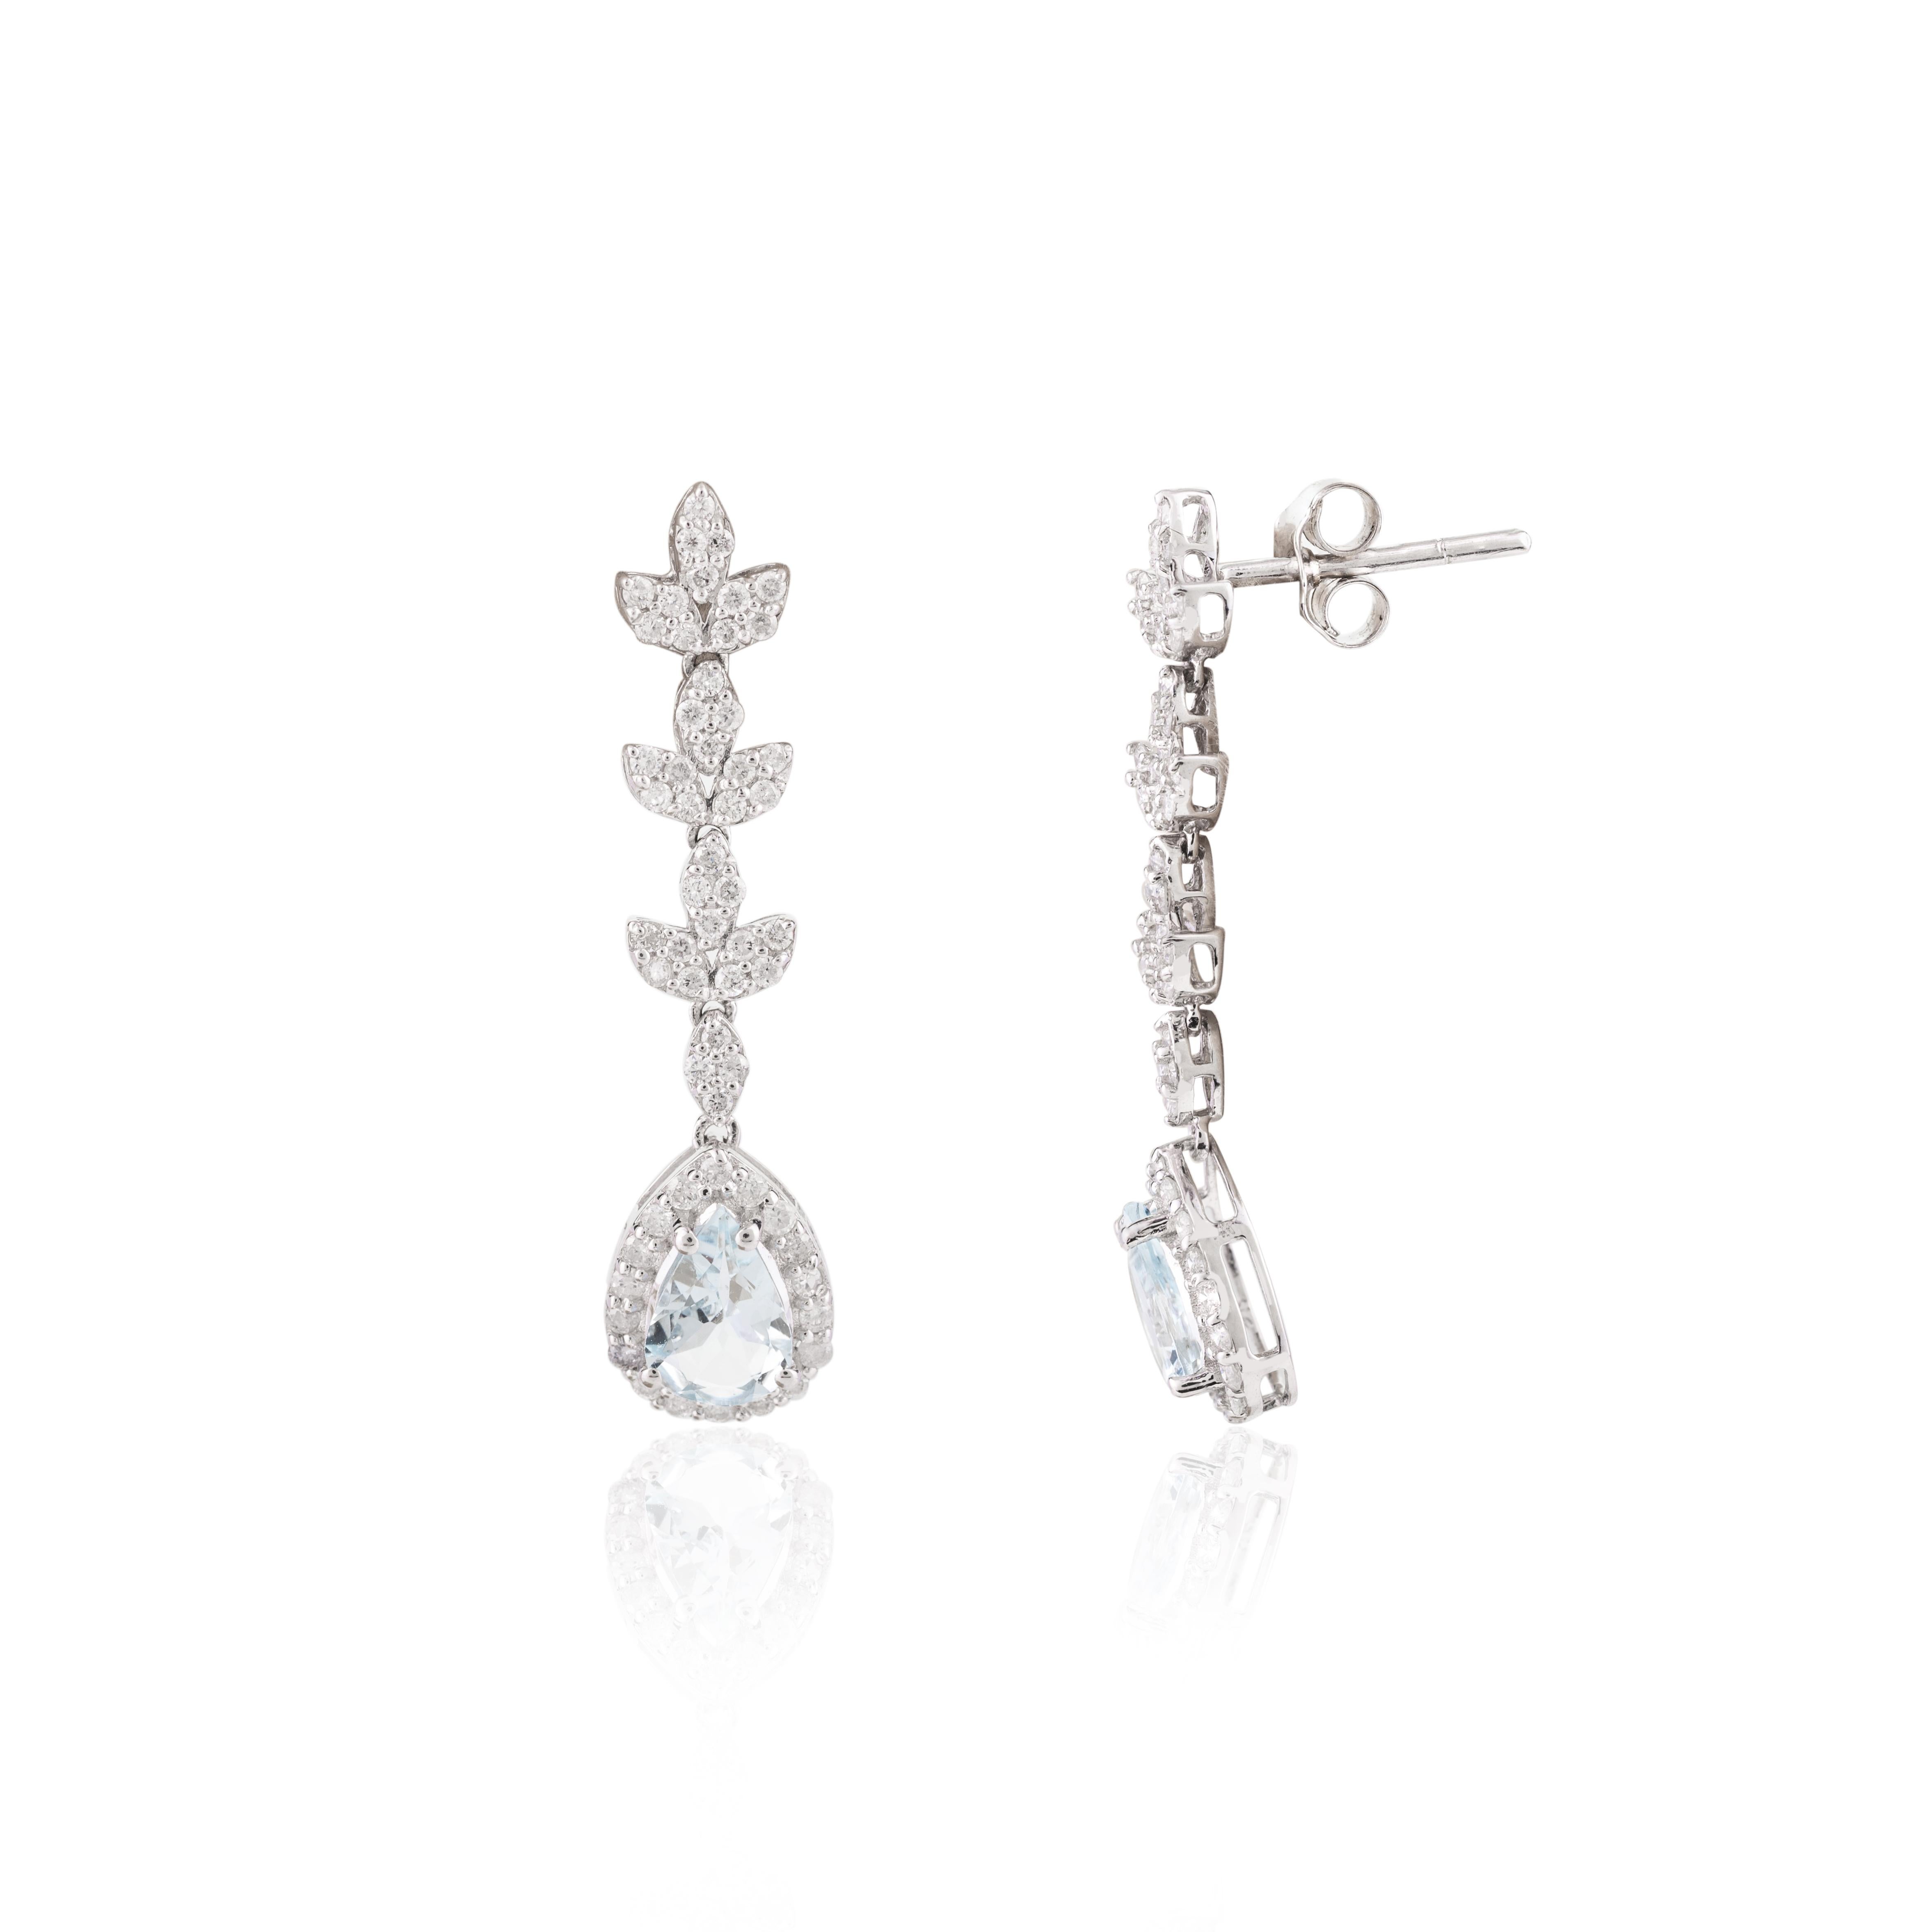 Certified Aquamarine Diamond Long Dangle Earrings in 14k White Gold In New Condition For Sale In Houston, TX